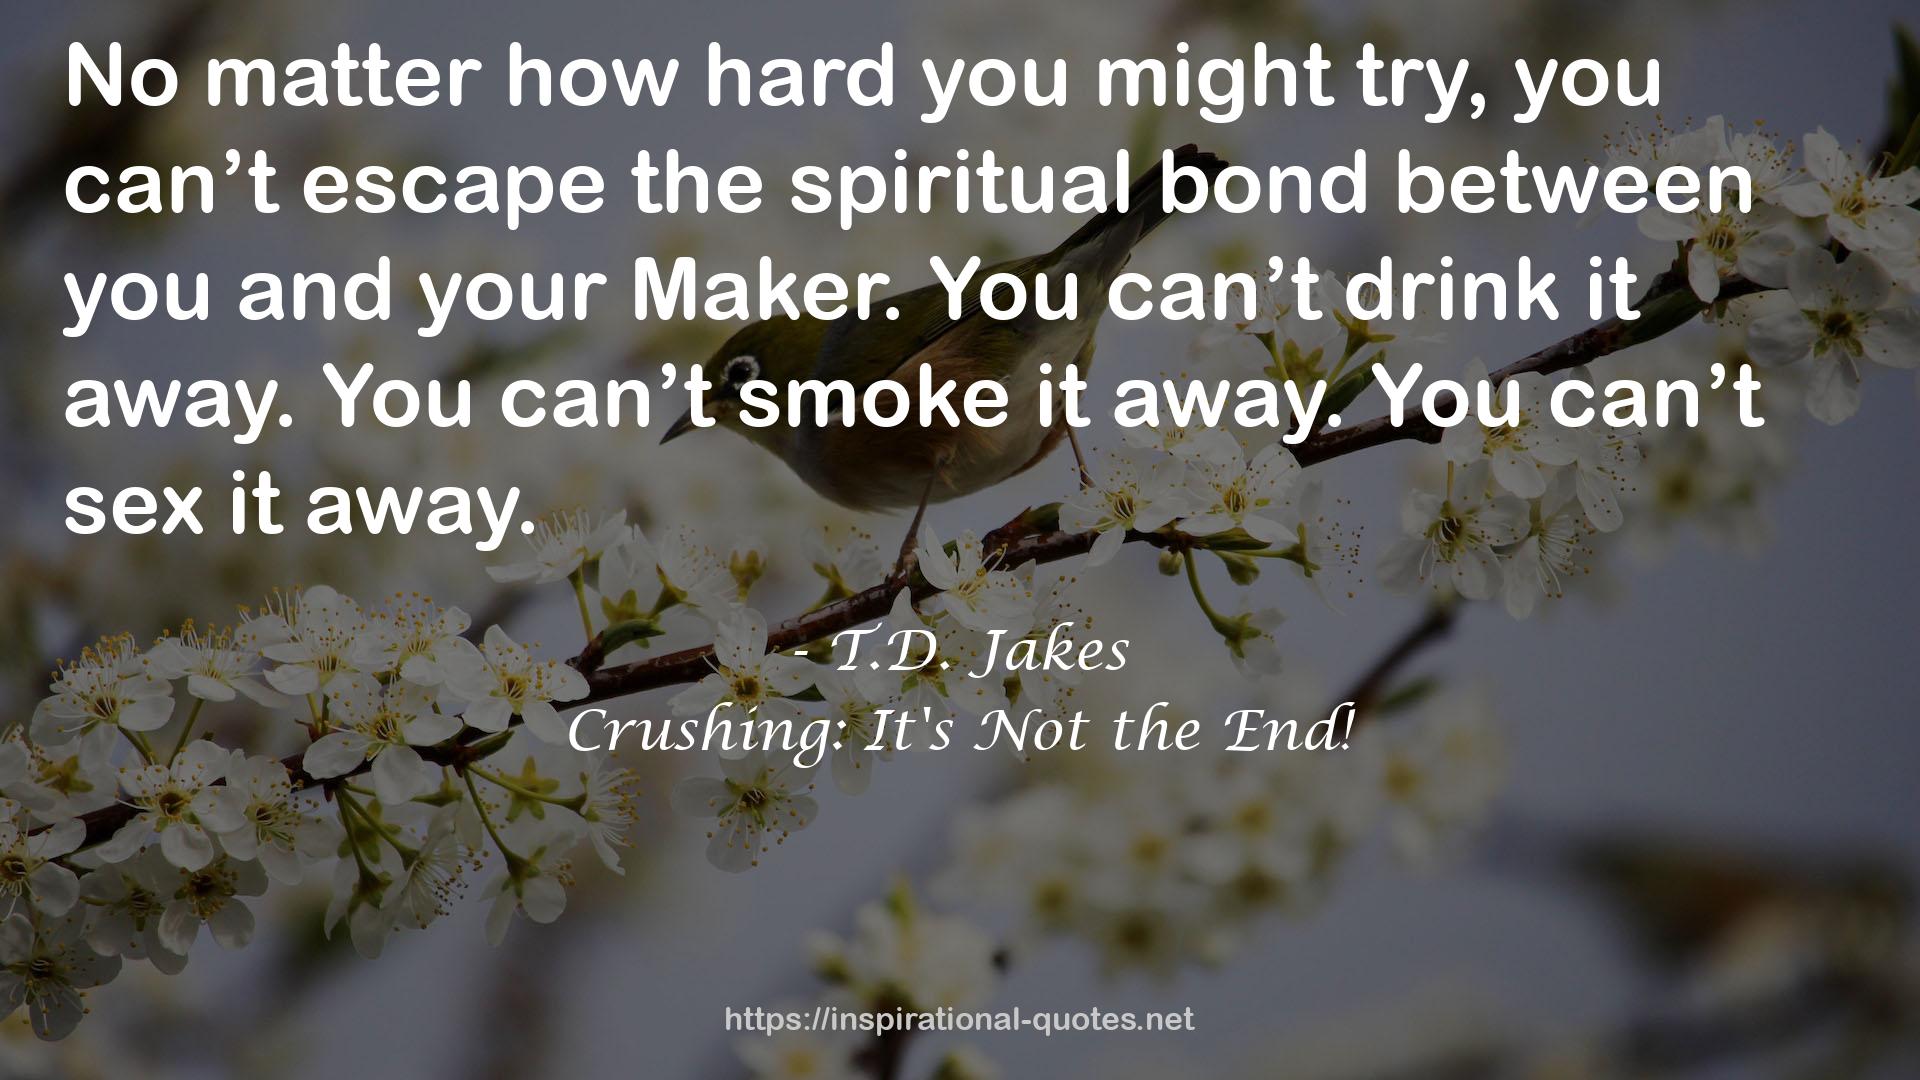 Crushing: It's Not the End! QUOTES